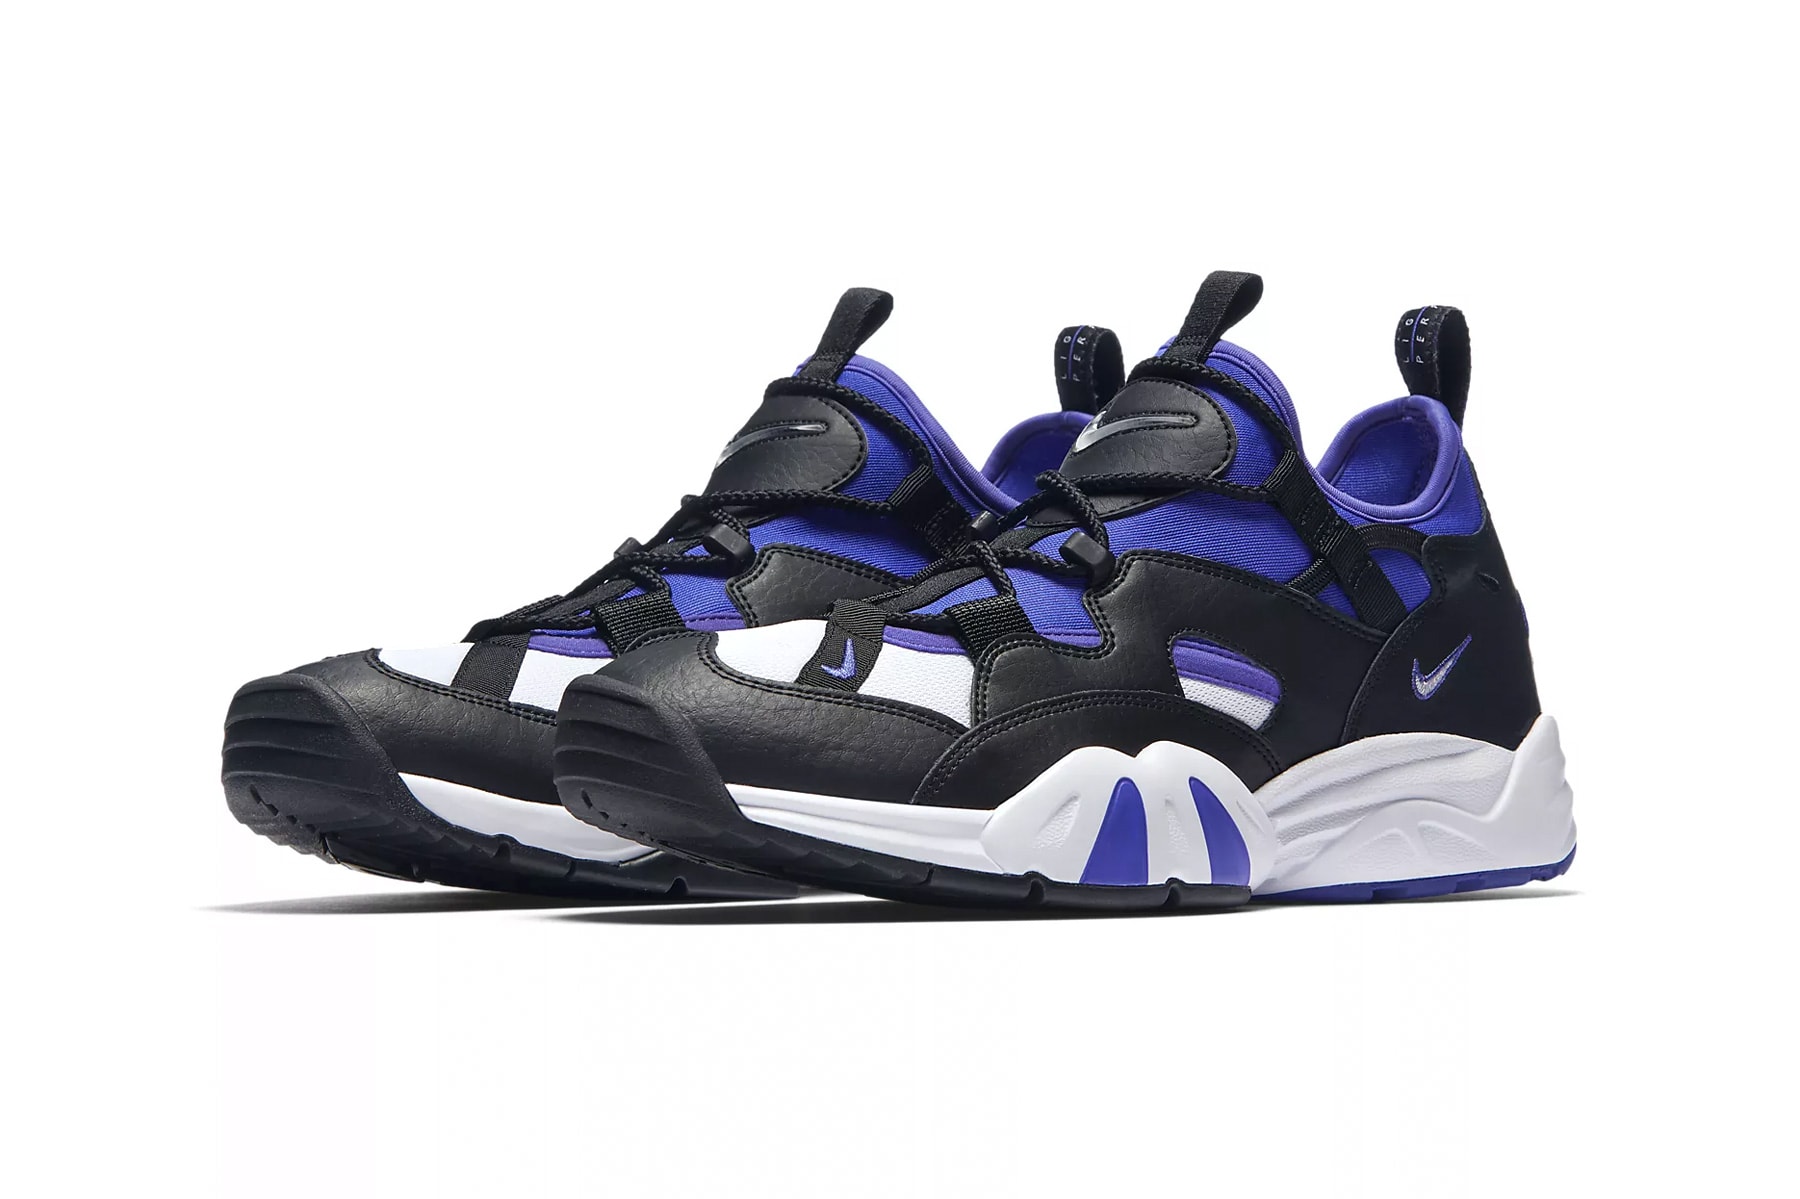 Nike Air Scream LWP Persian Violet release date available now purchase price sneaker